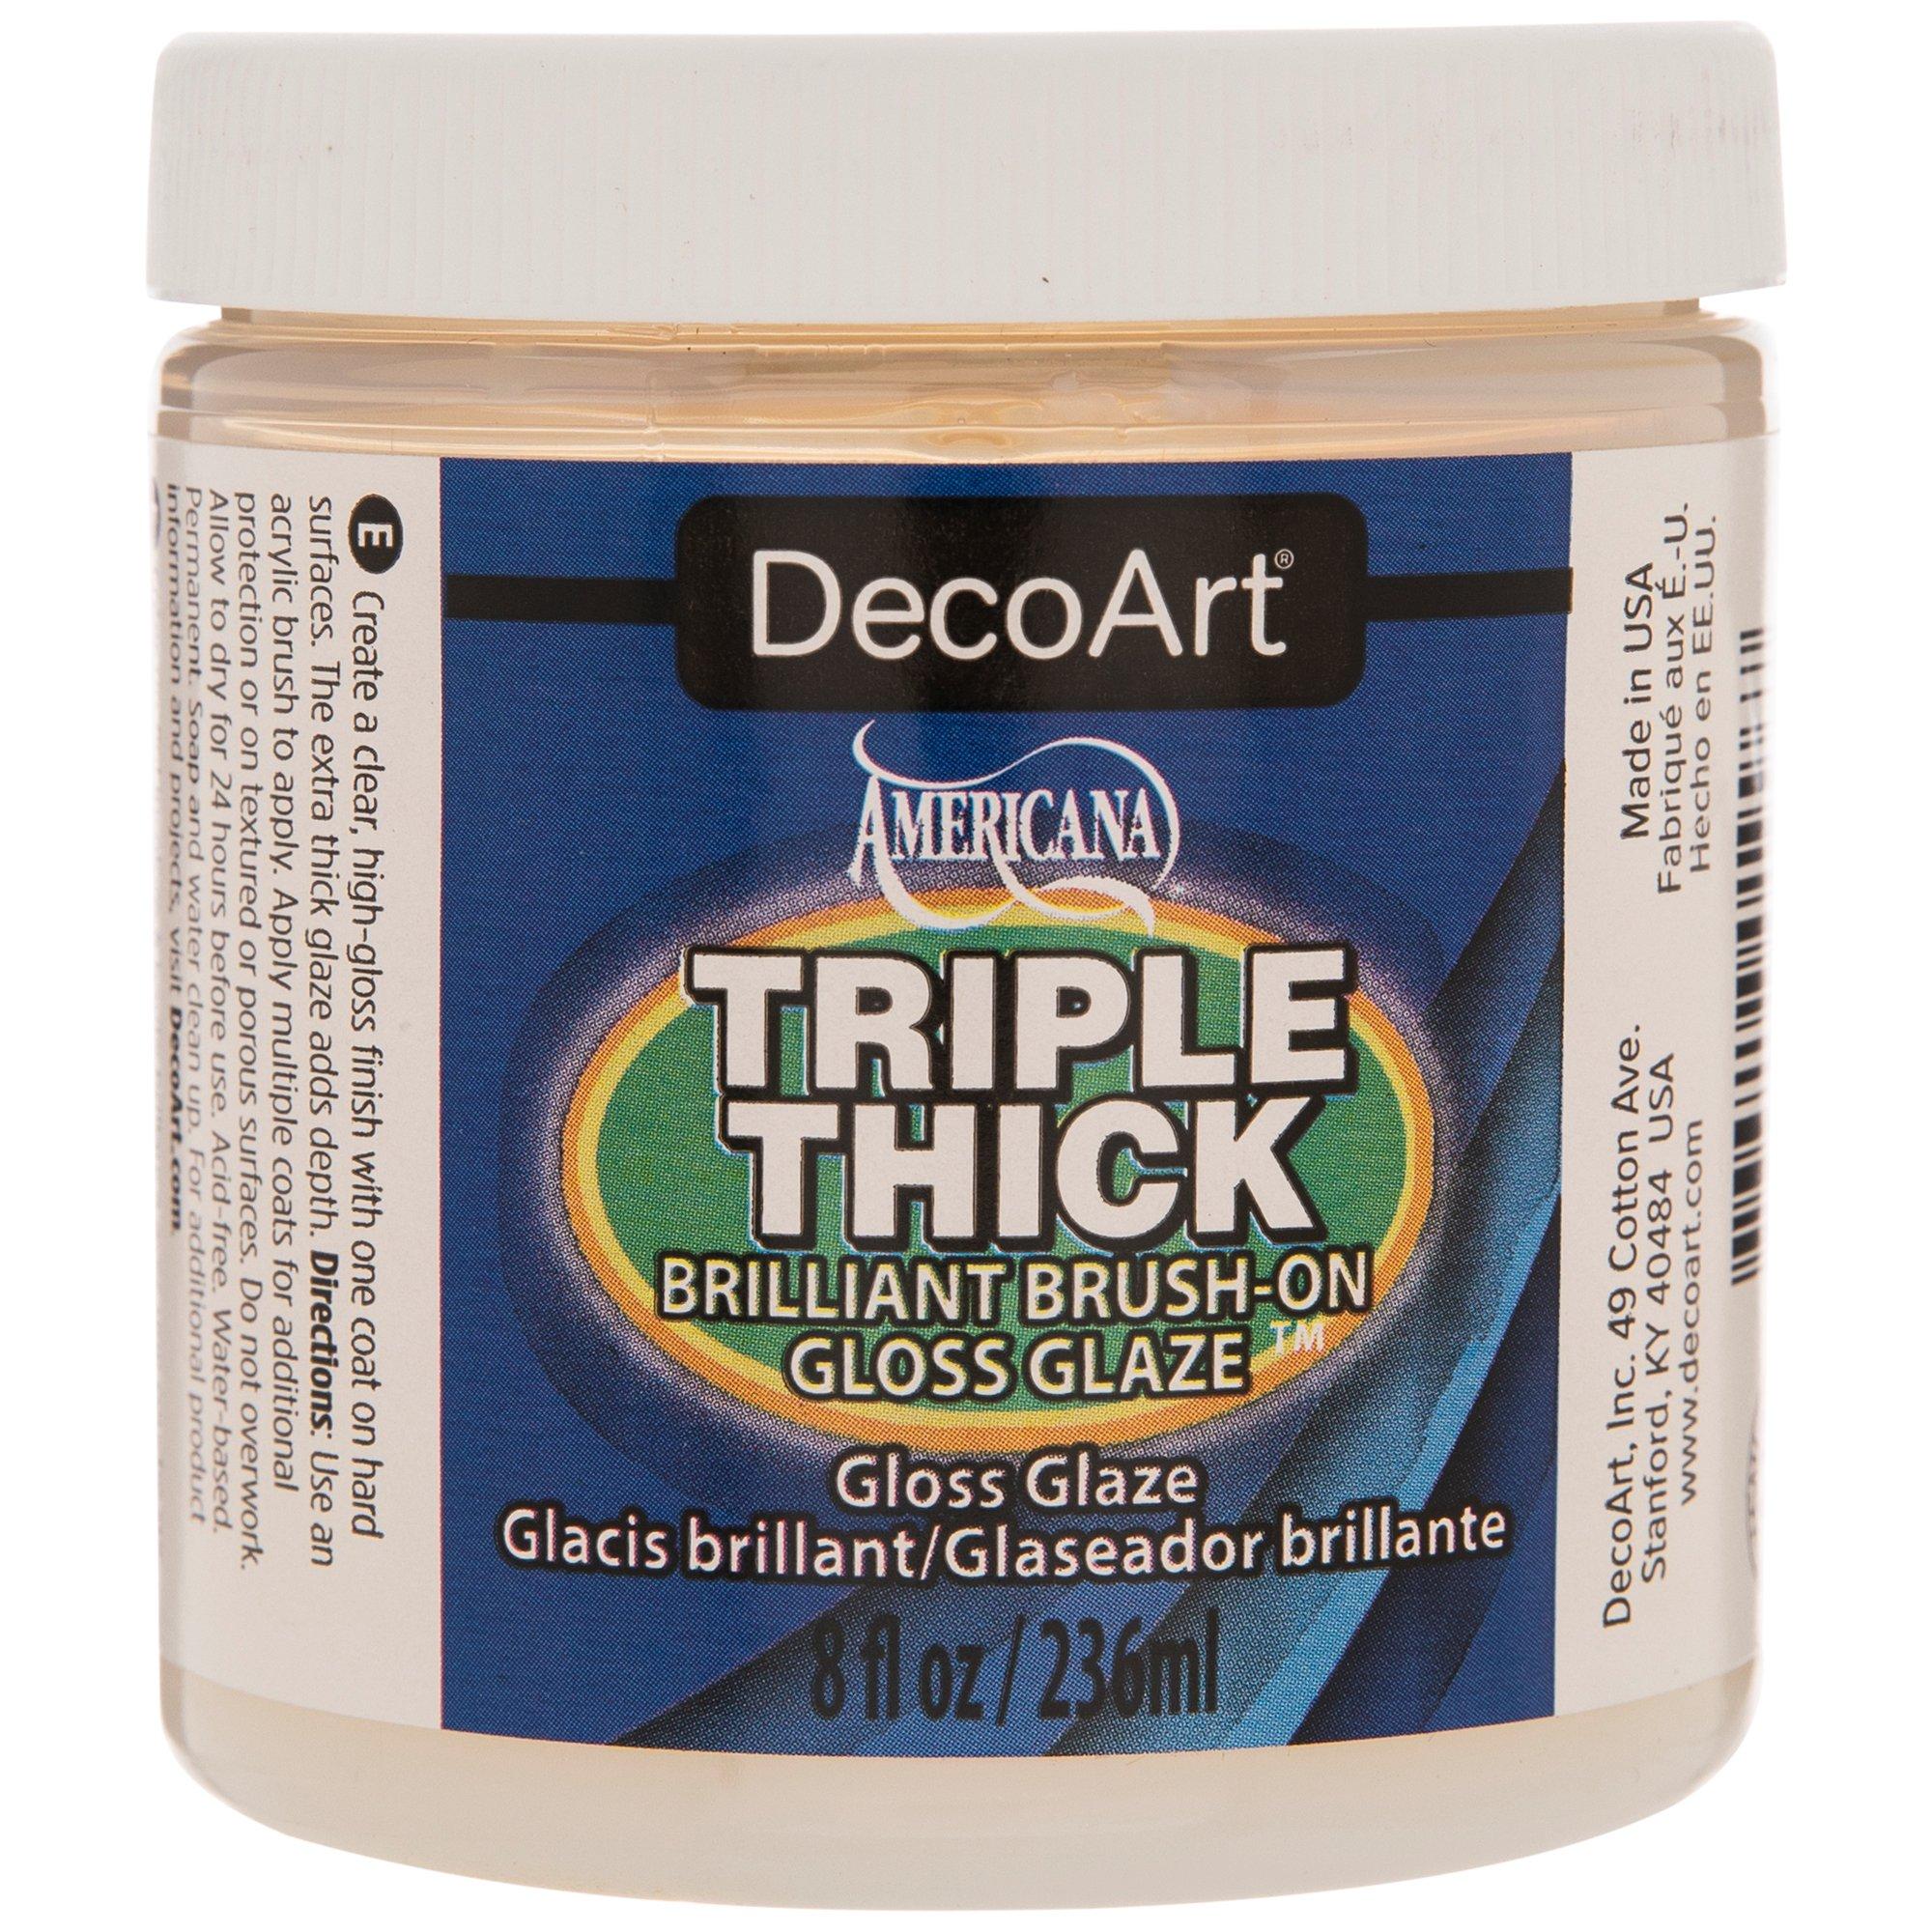  Triple Thick Brilliant Brush-On Gloss Glaze 2oz : Artists  Painting Supplies : Arts, Crafts & Sewing